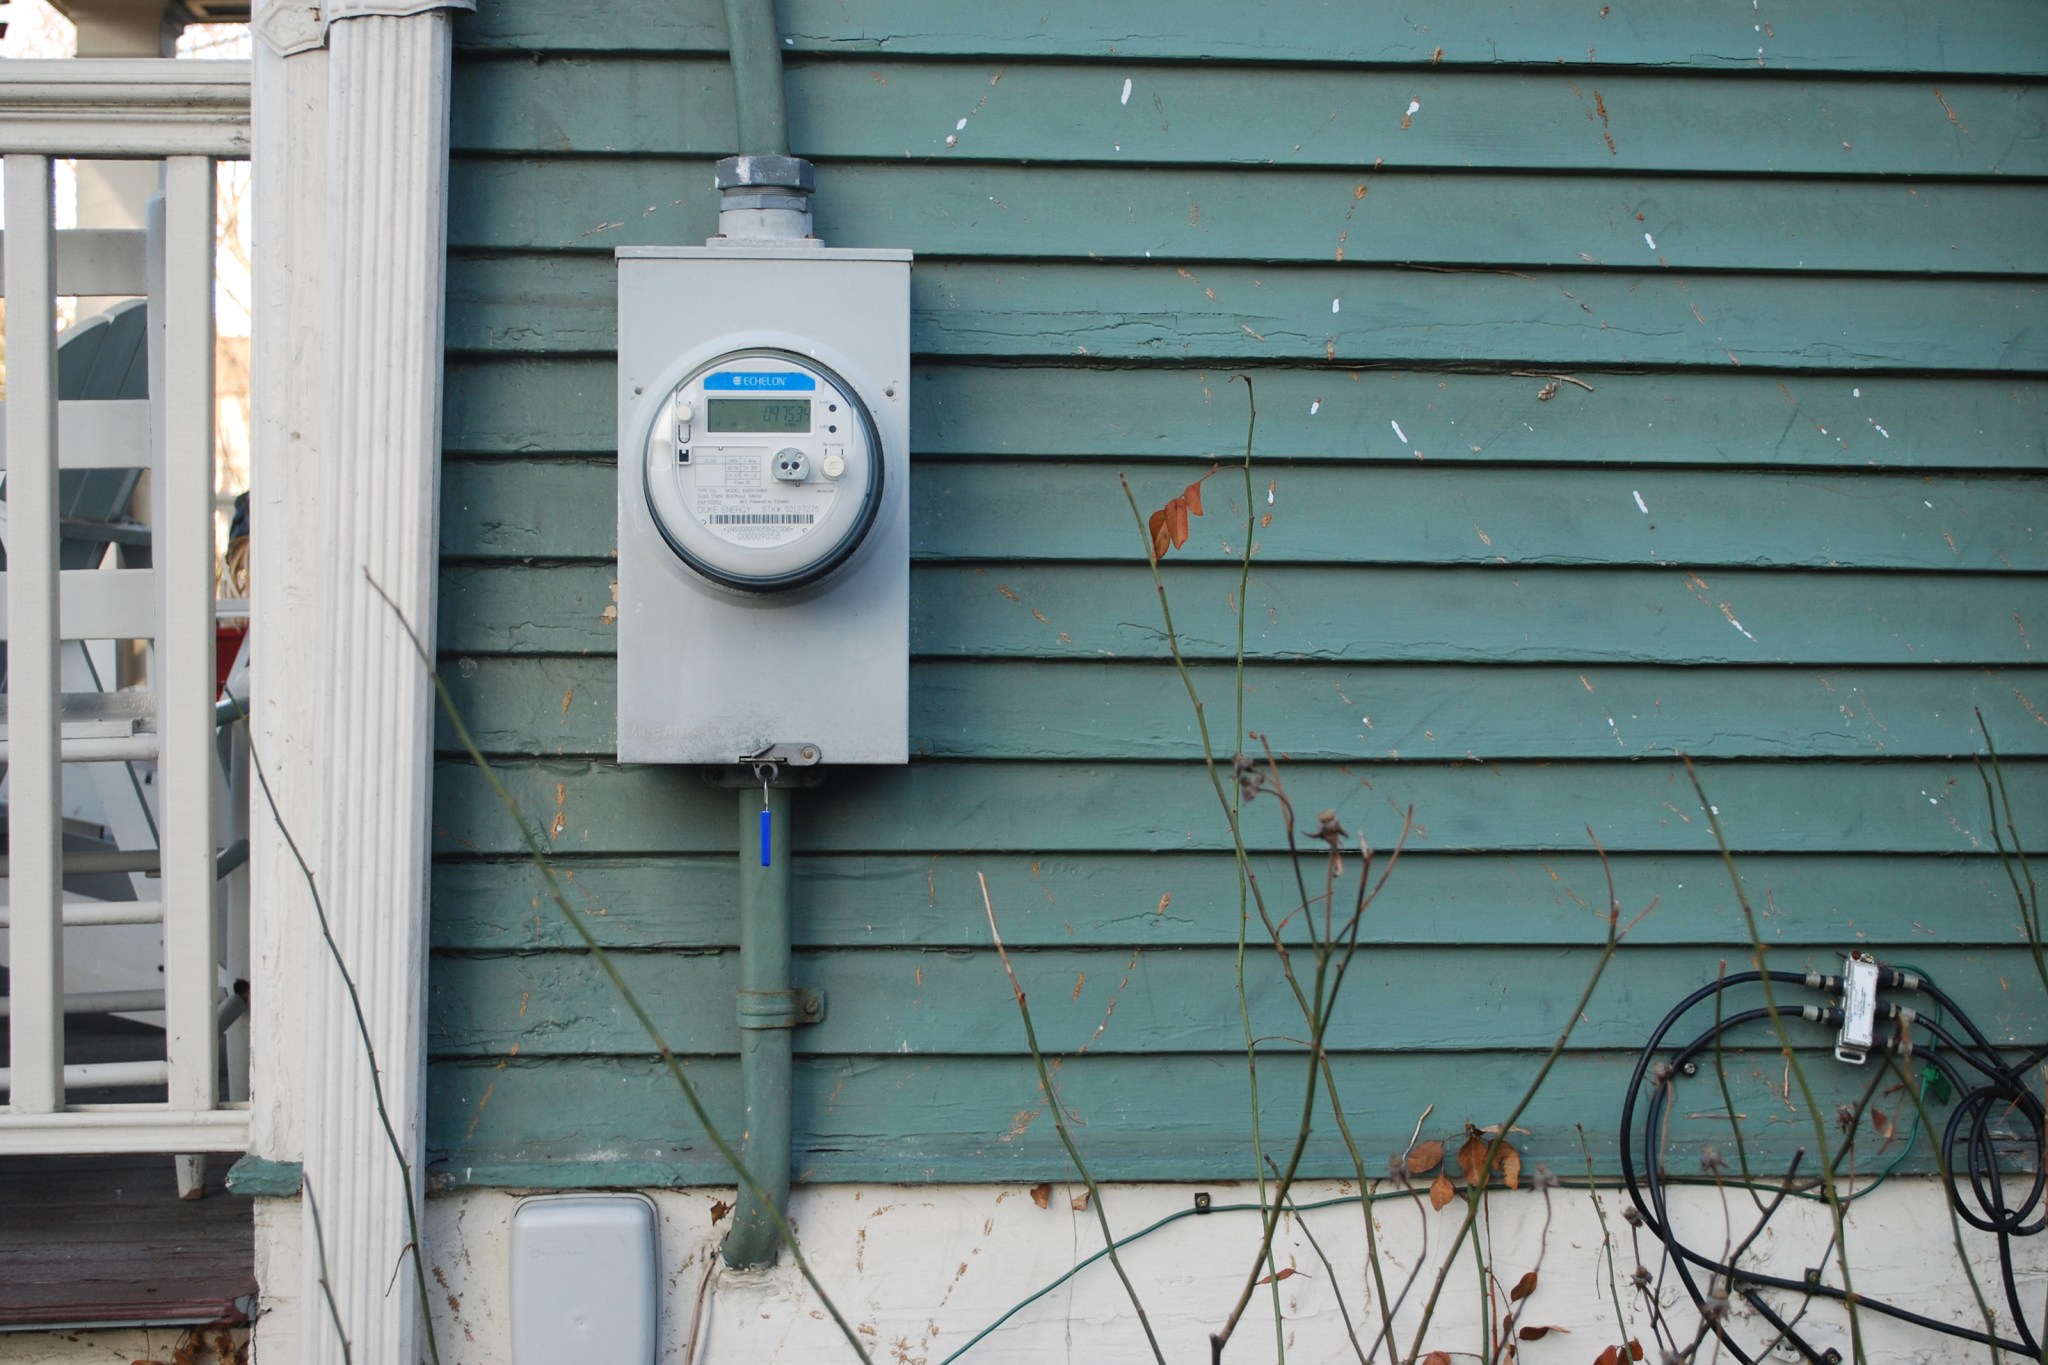 Energy meter outside of a home